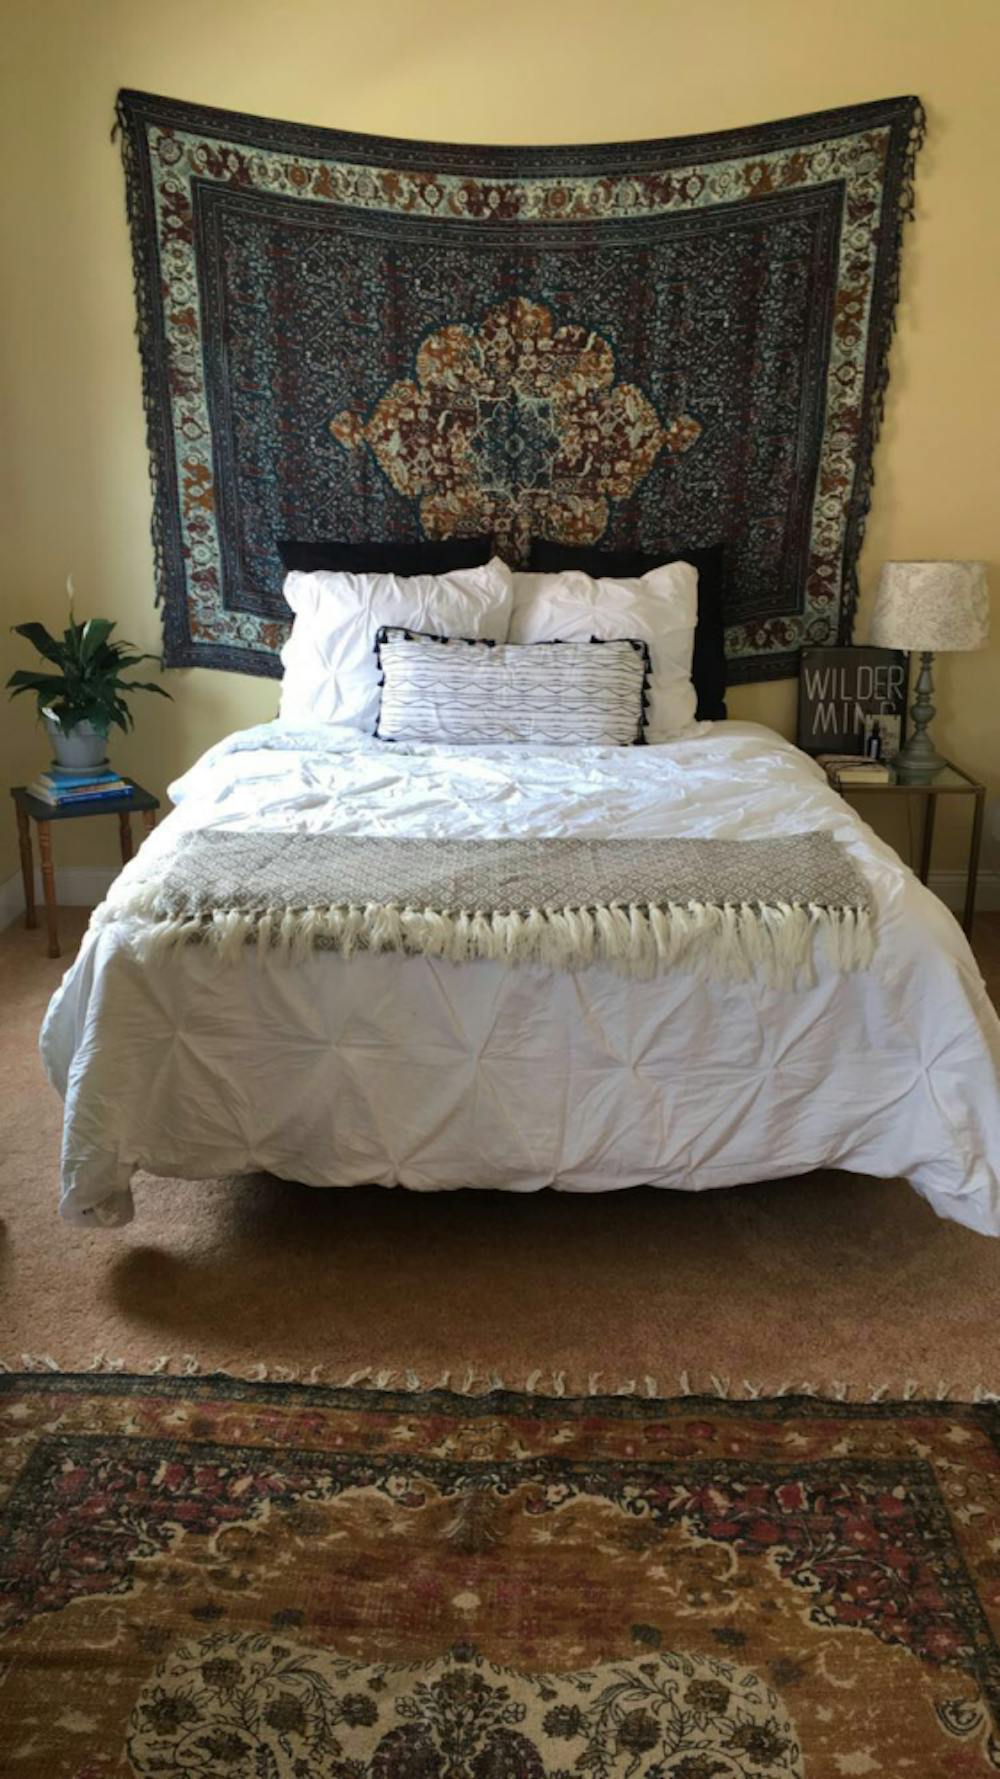 With bedding from Target, a homemade pillow and tapestry from Urban Outfitters, Gardetto gives a cozy feel to where she sleeps. A rug from World Market brings together the entire area.